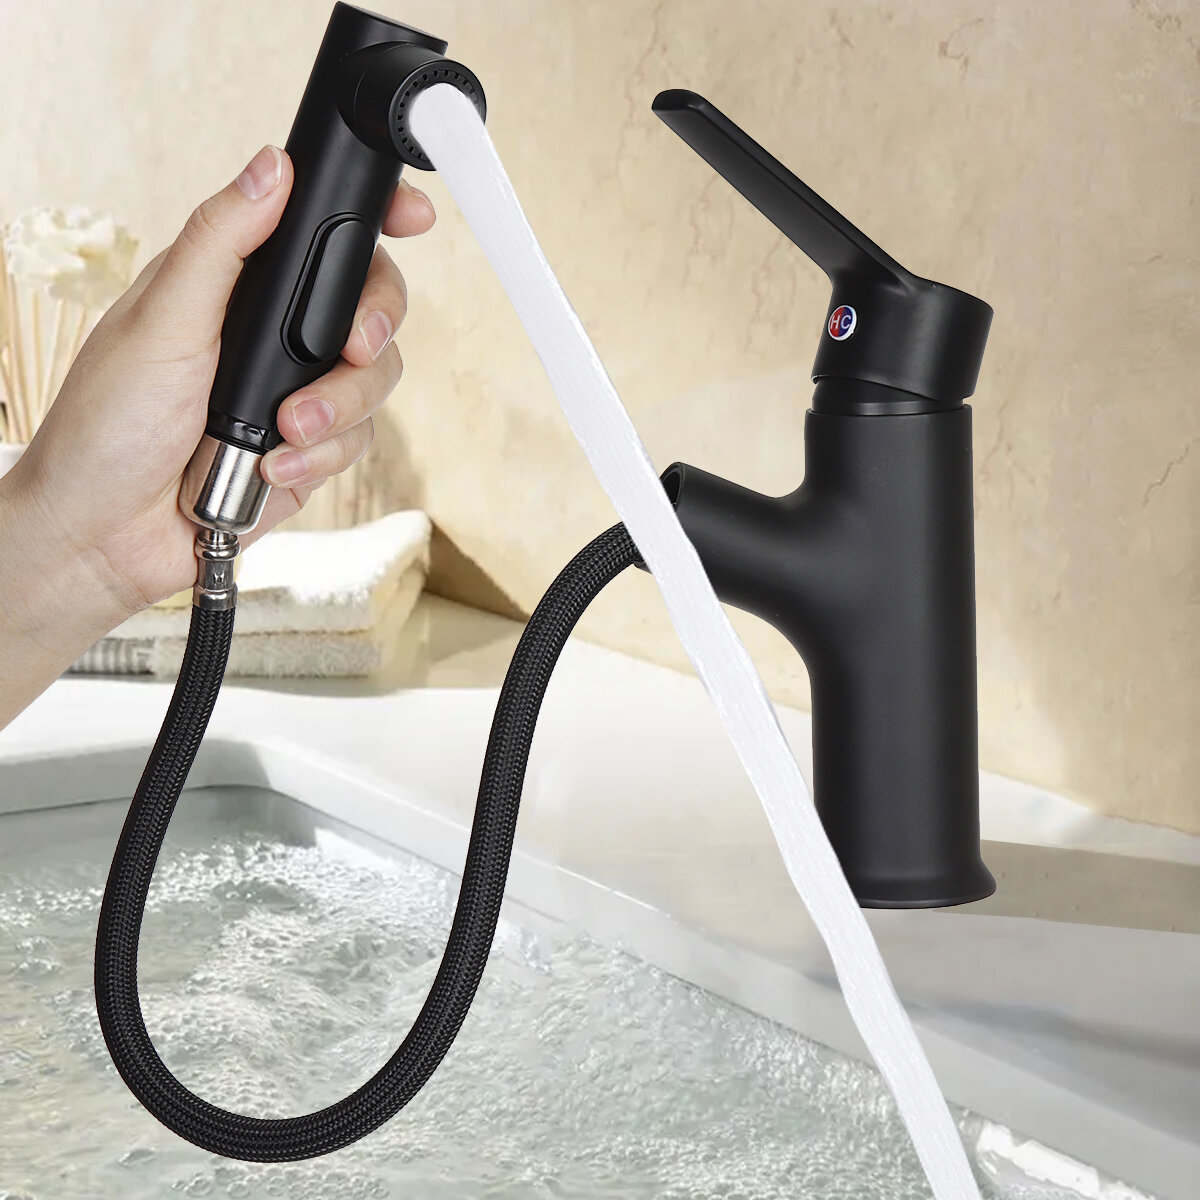 Image of Sink Faucet Kitchen Pull Out Single Handle Mixer Tap Sprayer Bathroom Black